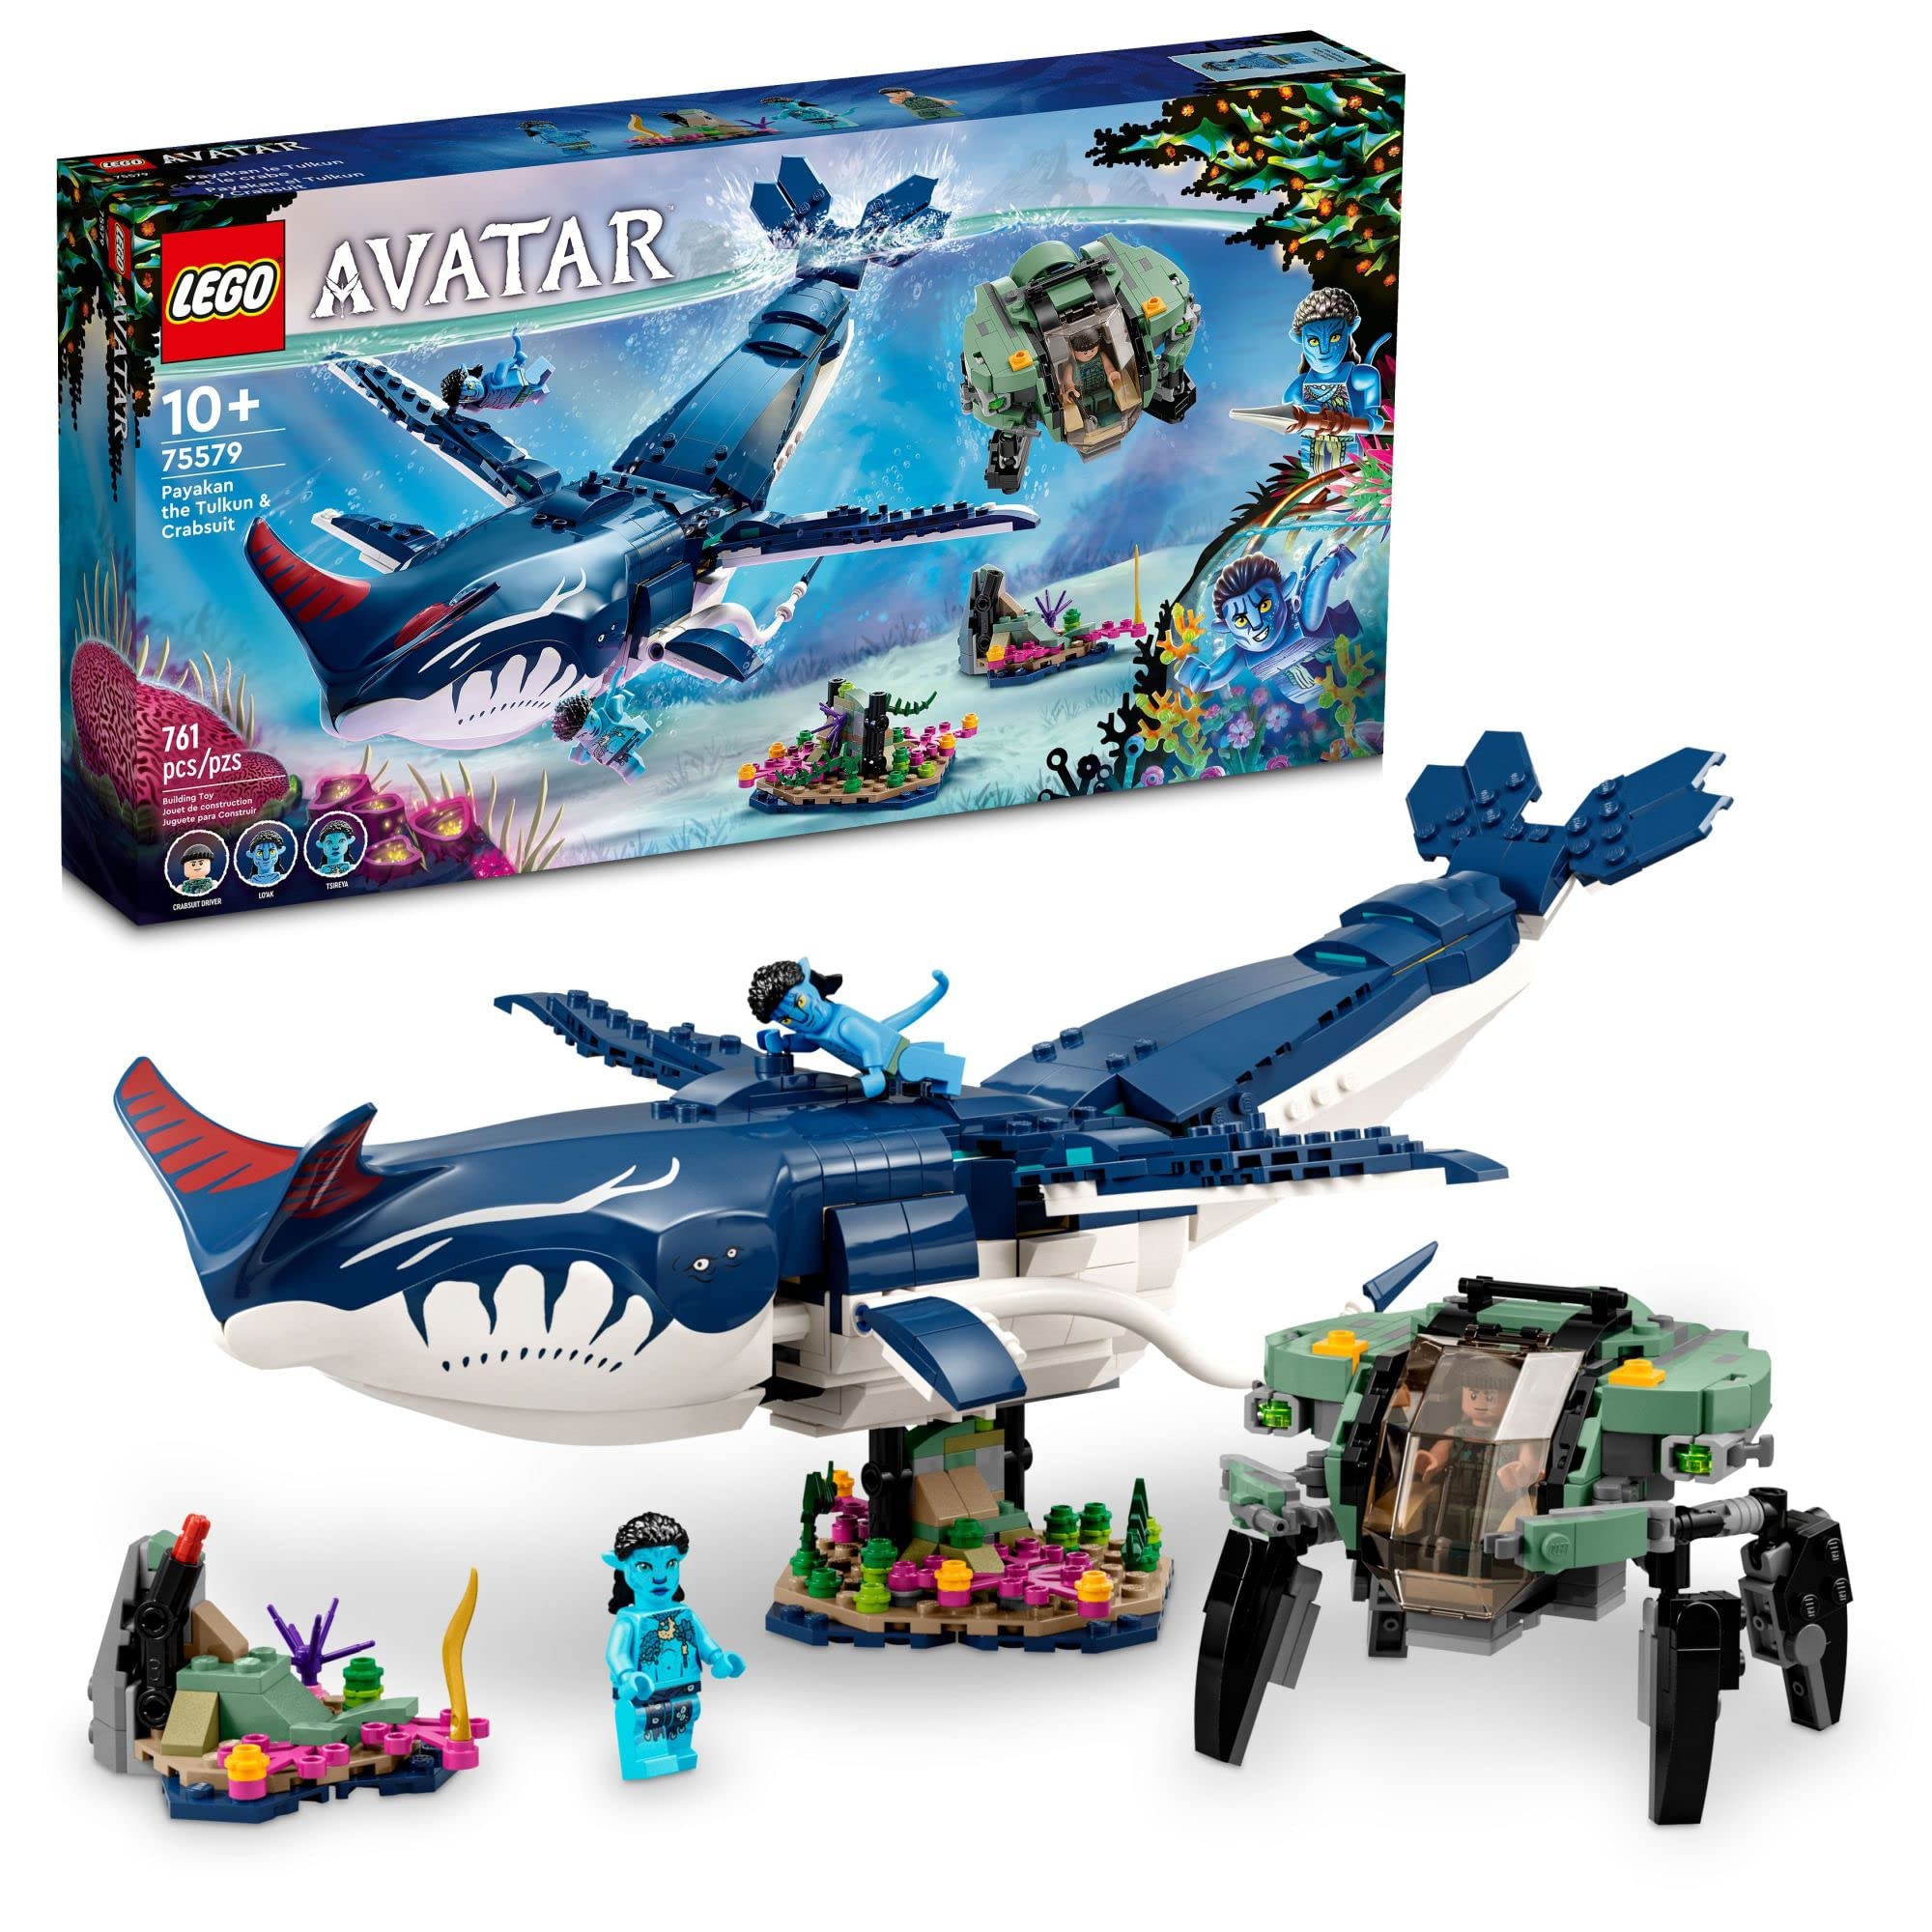 Amazoncom LEGO Avatar Floating Mountains Site 26  RDA Samson 75573  Building Set  Helicopter Toy Featuring 5 Minifigures and Direhorse Animal  Figure Movie Inspired Set Gift Idea for Kids Ages 9  Toys  Games